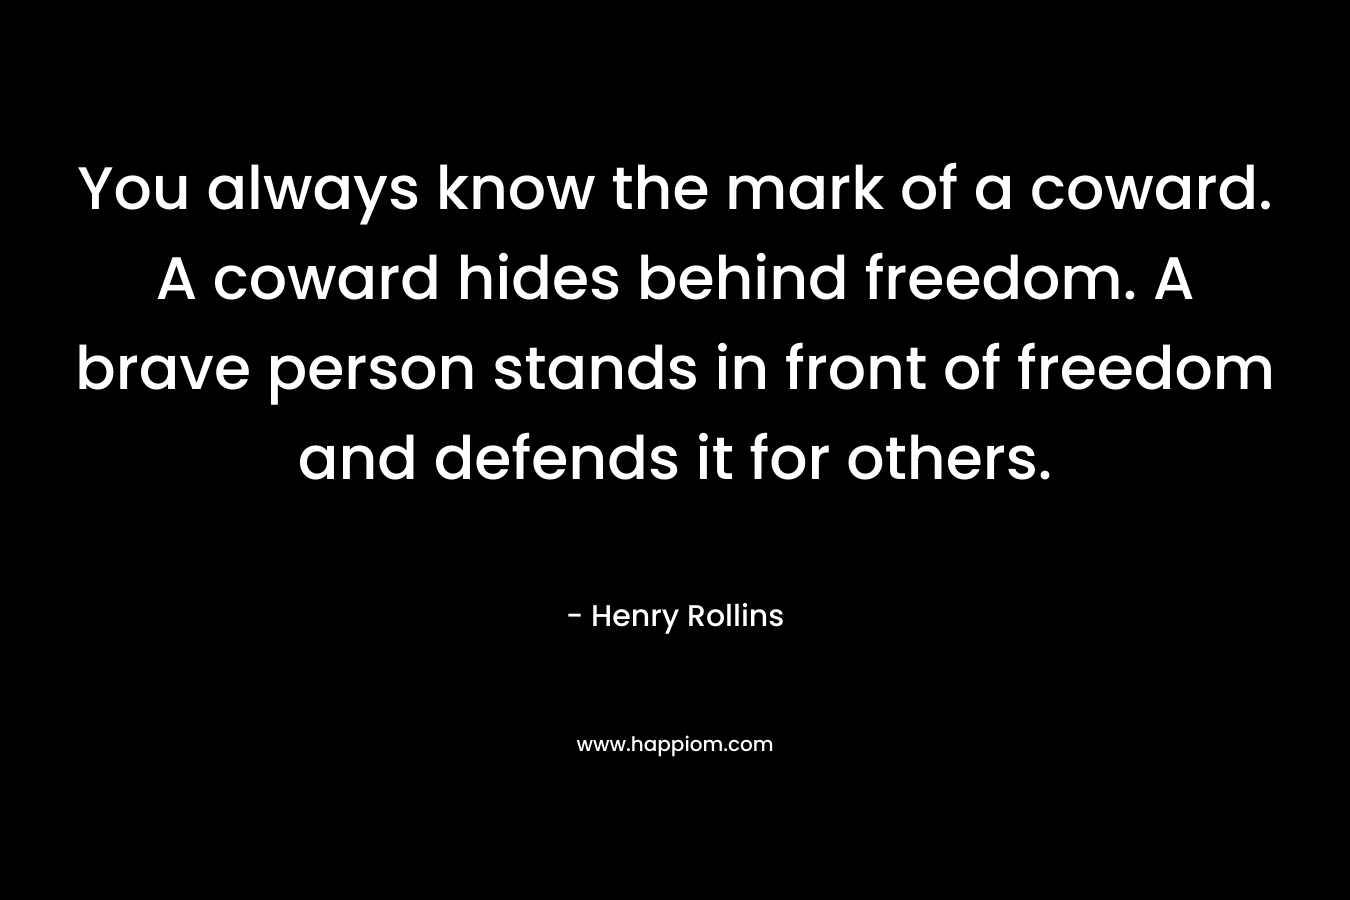 You always know the mark of a coward. A coward hides behind freedom. A brave person stands in front of freedom and defends it for others. – Henry Rollins